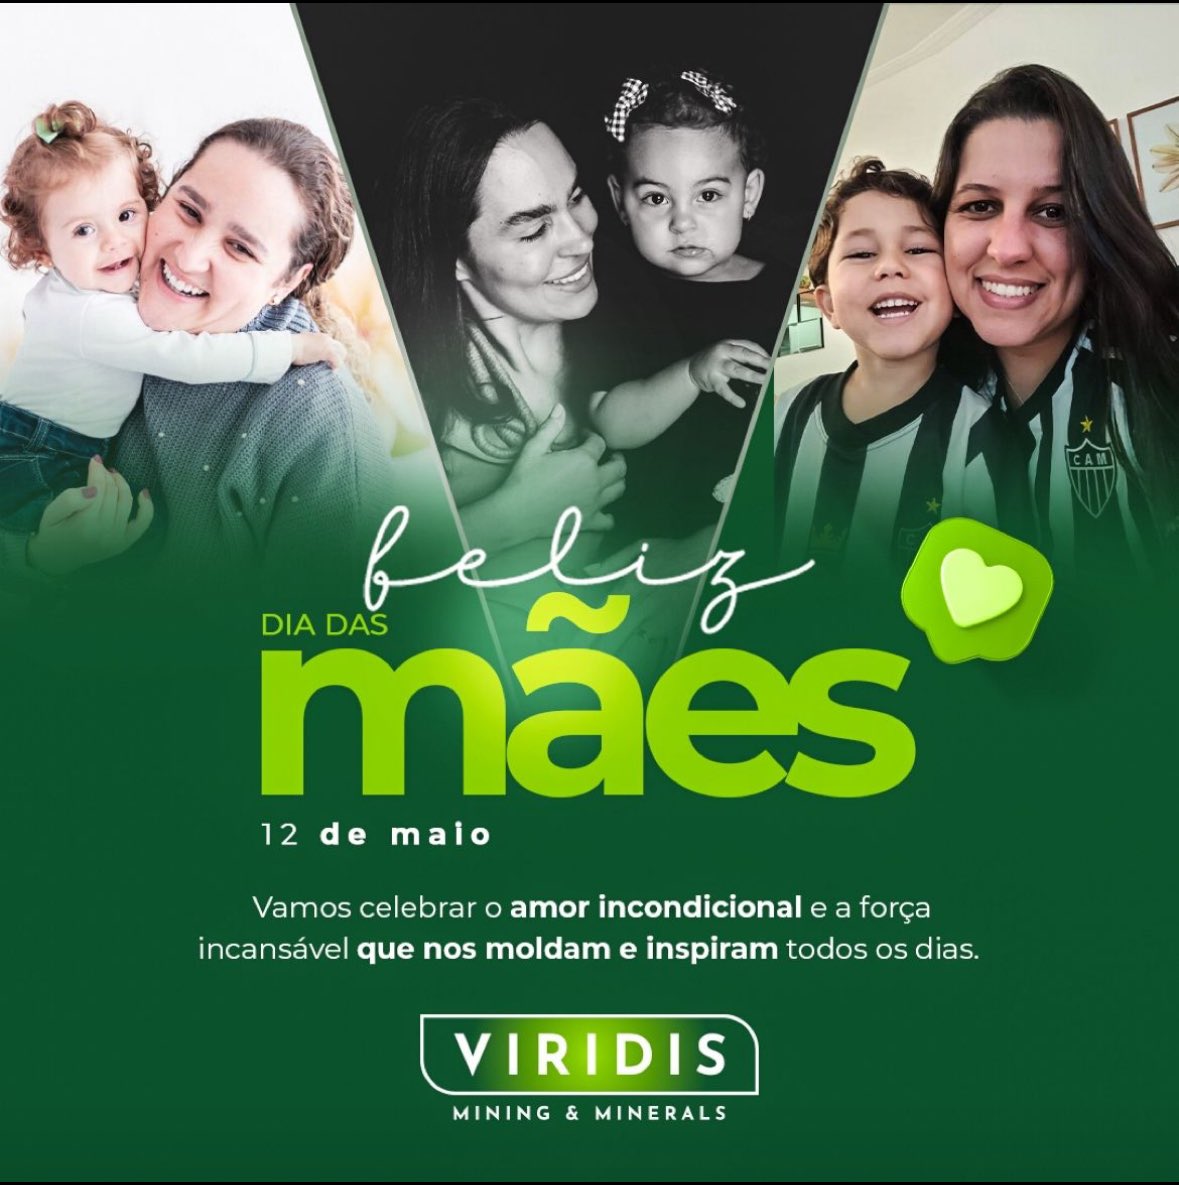 Today, we celebrate not only Mother’s Day but also the strength and dedication of mothers who juggle multiple roles, both at home and outside.

Tribute to all mothers who shine in their careers and their homes.

$VMM #MothersDay #WomenAtWork #SuperMoms #WeareGreen #WeareViridis